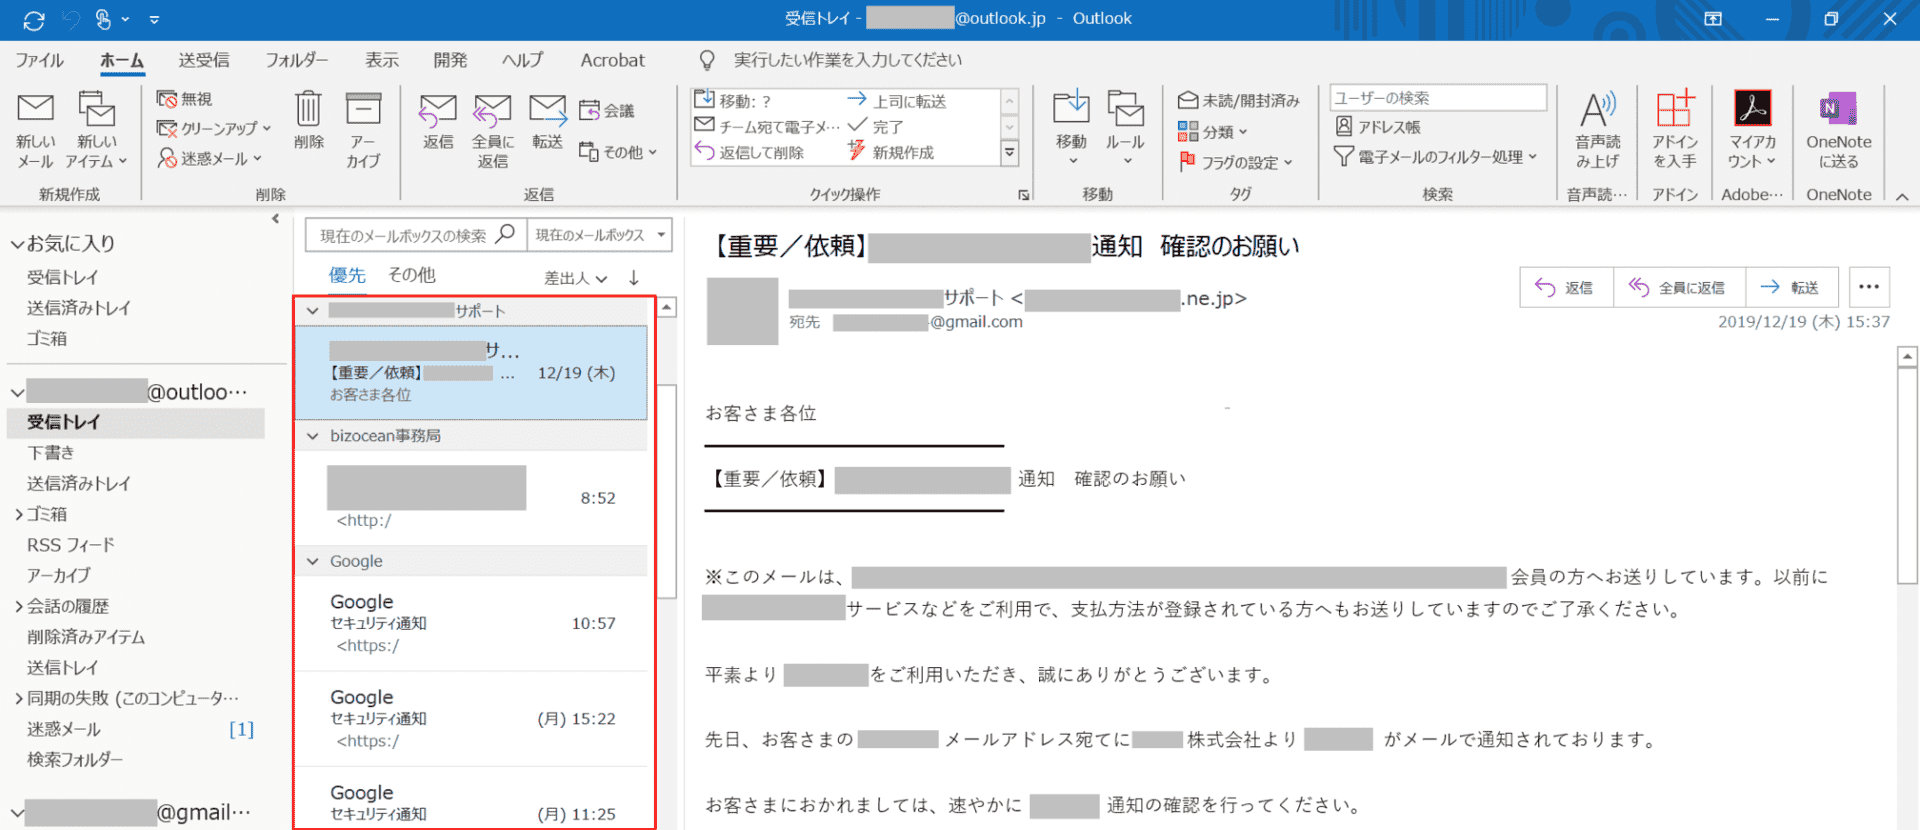 Gmail から Outlook への移行